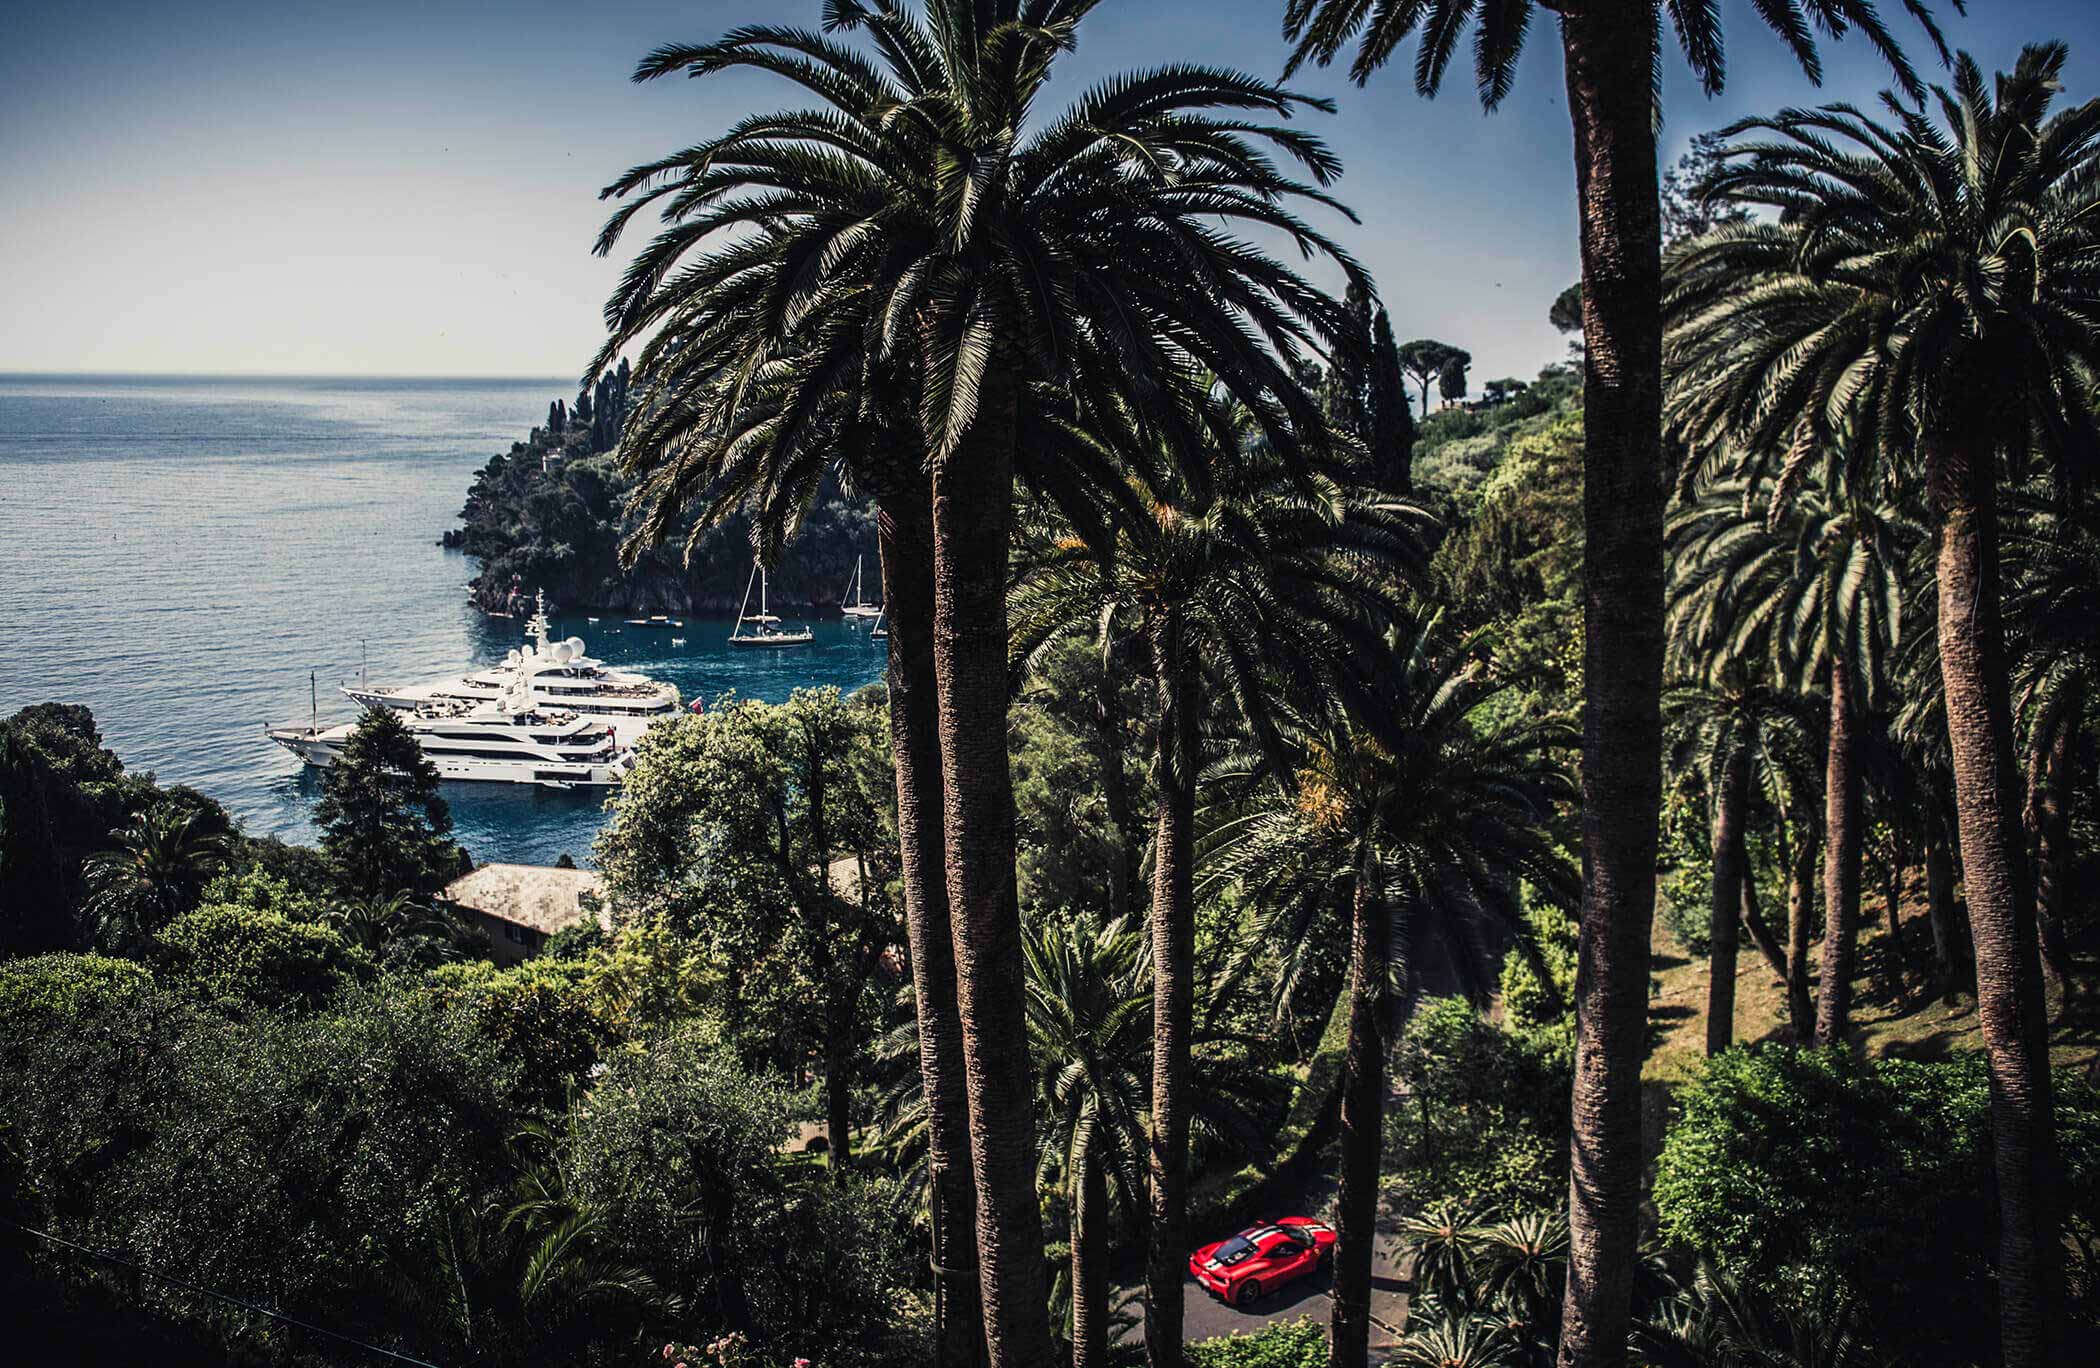 Red Ferrari driving along the South of France coastline with palm trees in the foreground and a super yacht in the background